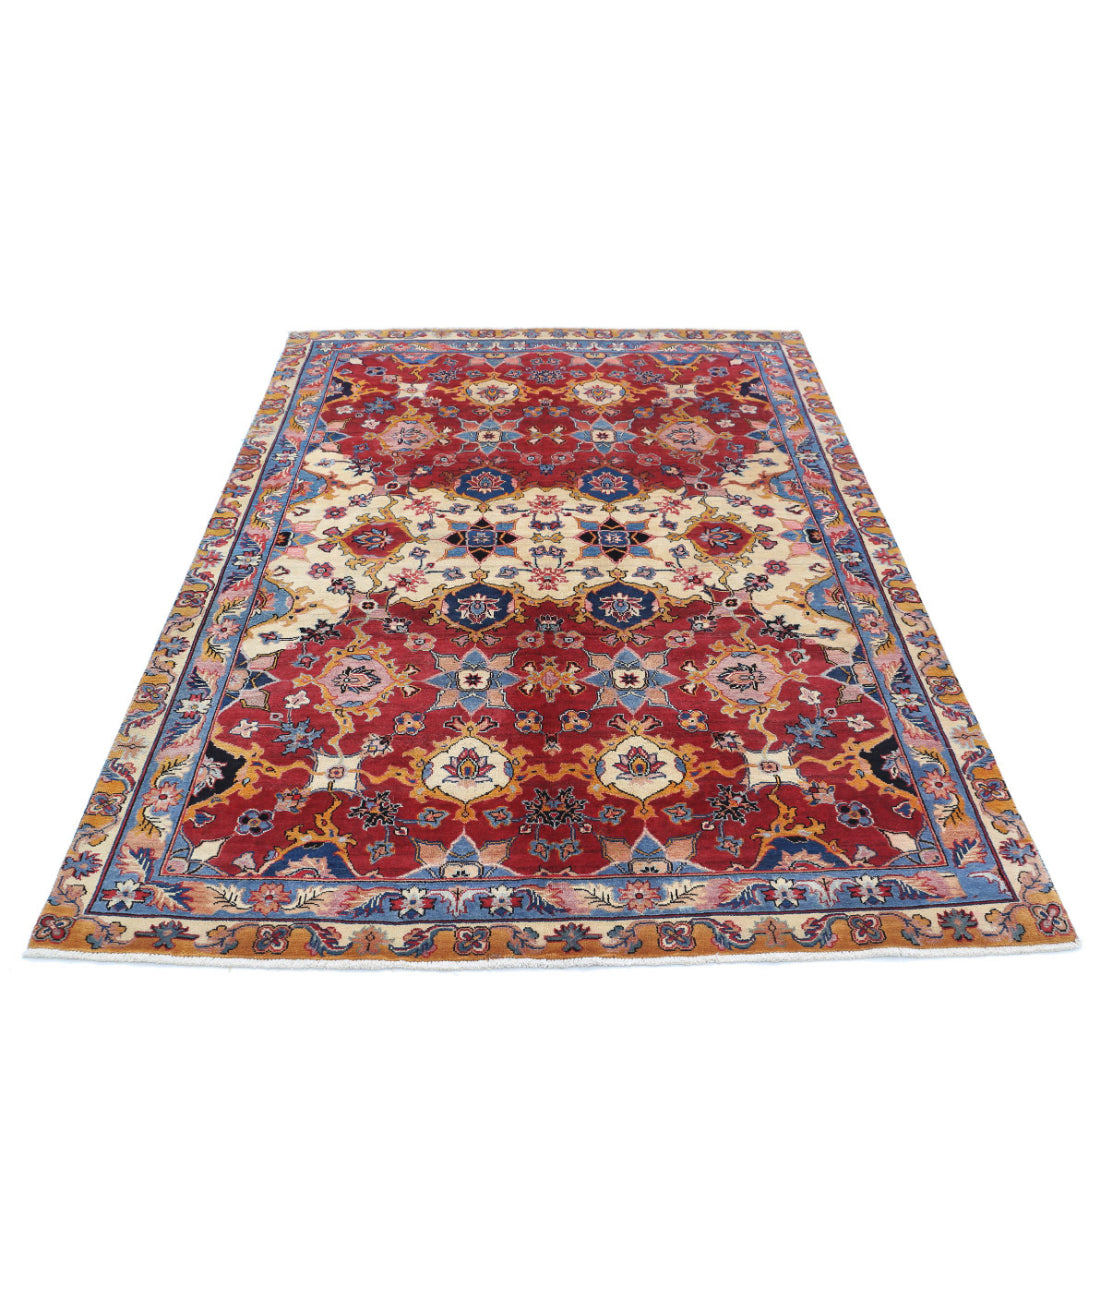 Agra 5'0'' X 7'0'' Hand-Knotted Wool Rug 5'0'' x 7'0'' (60 X 123) / Red / Blue